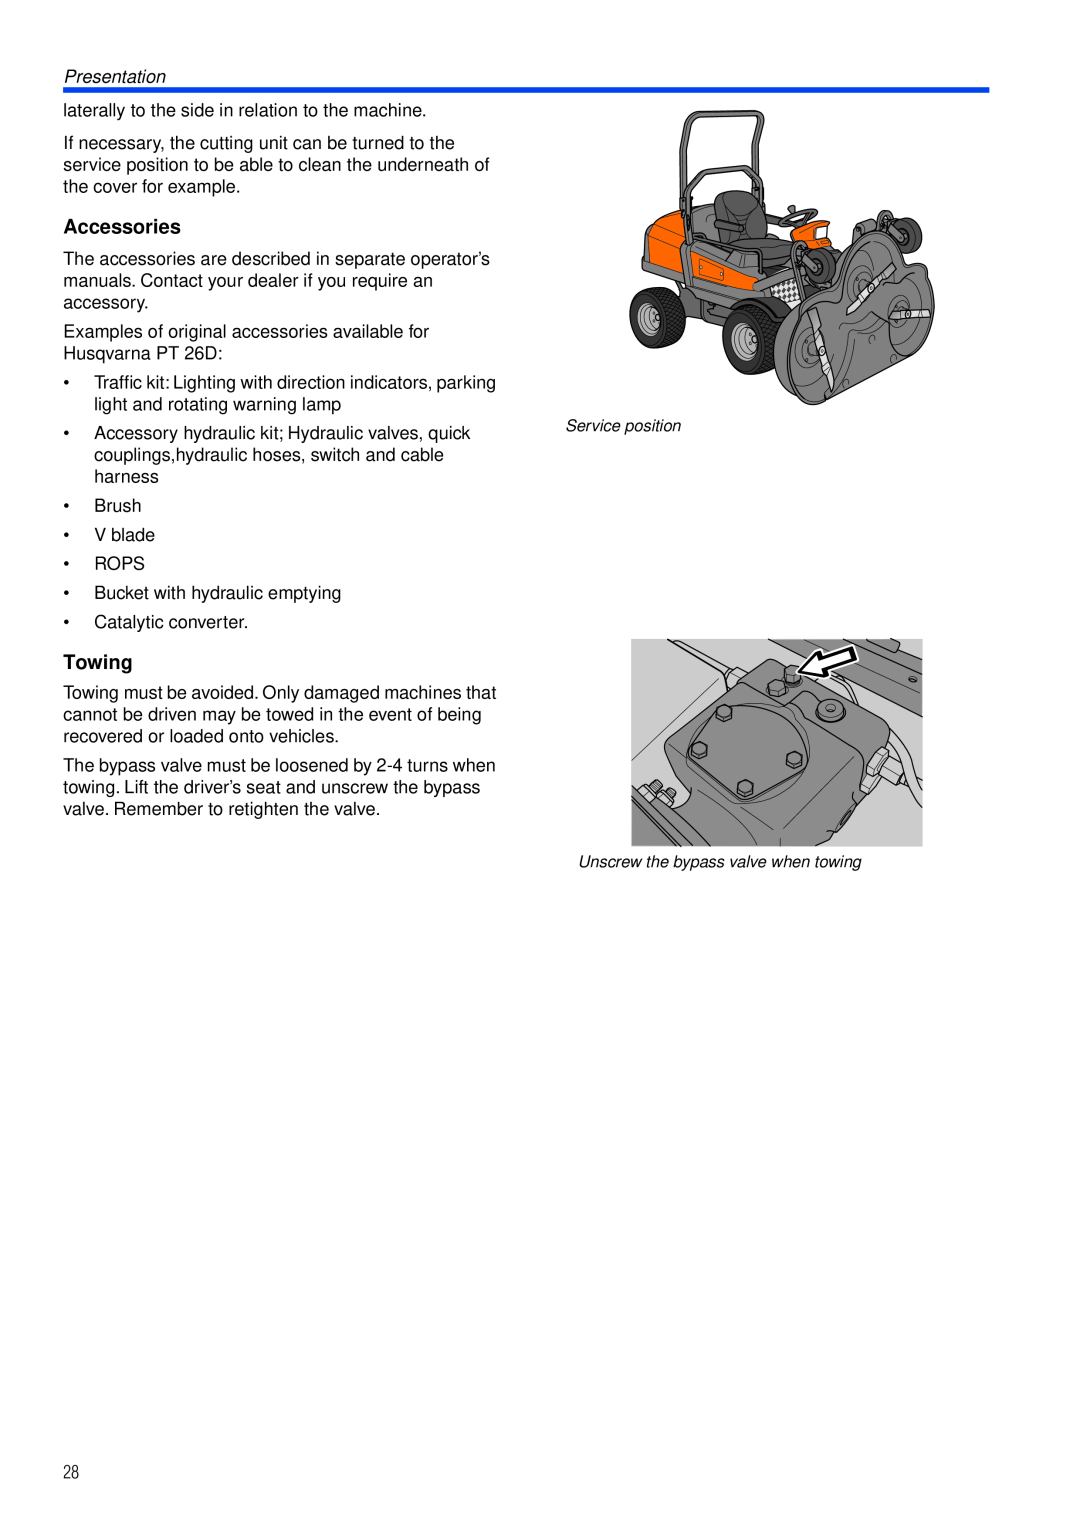 Husqvarna PT26 D manual Accessories, Towing, Presentation, laterally to the side in relation to the machine 